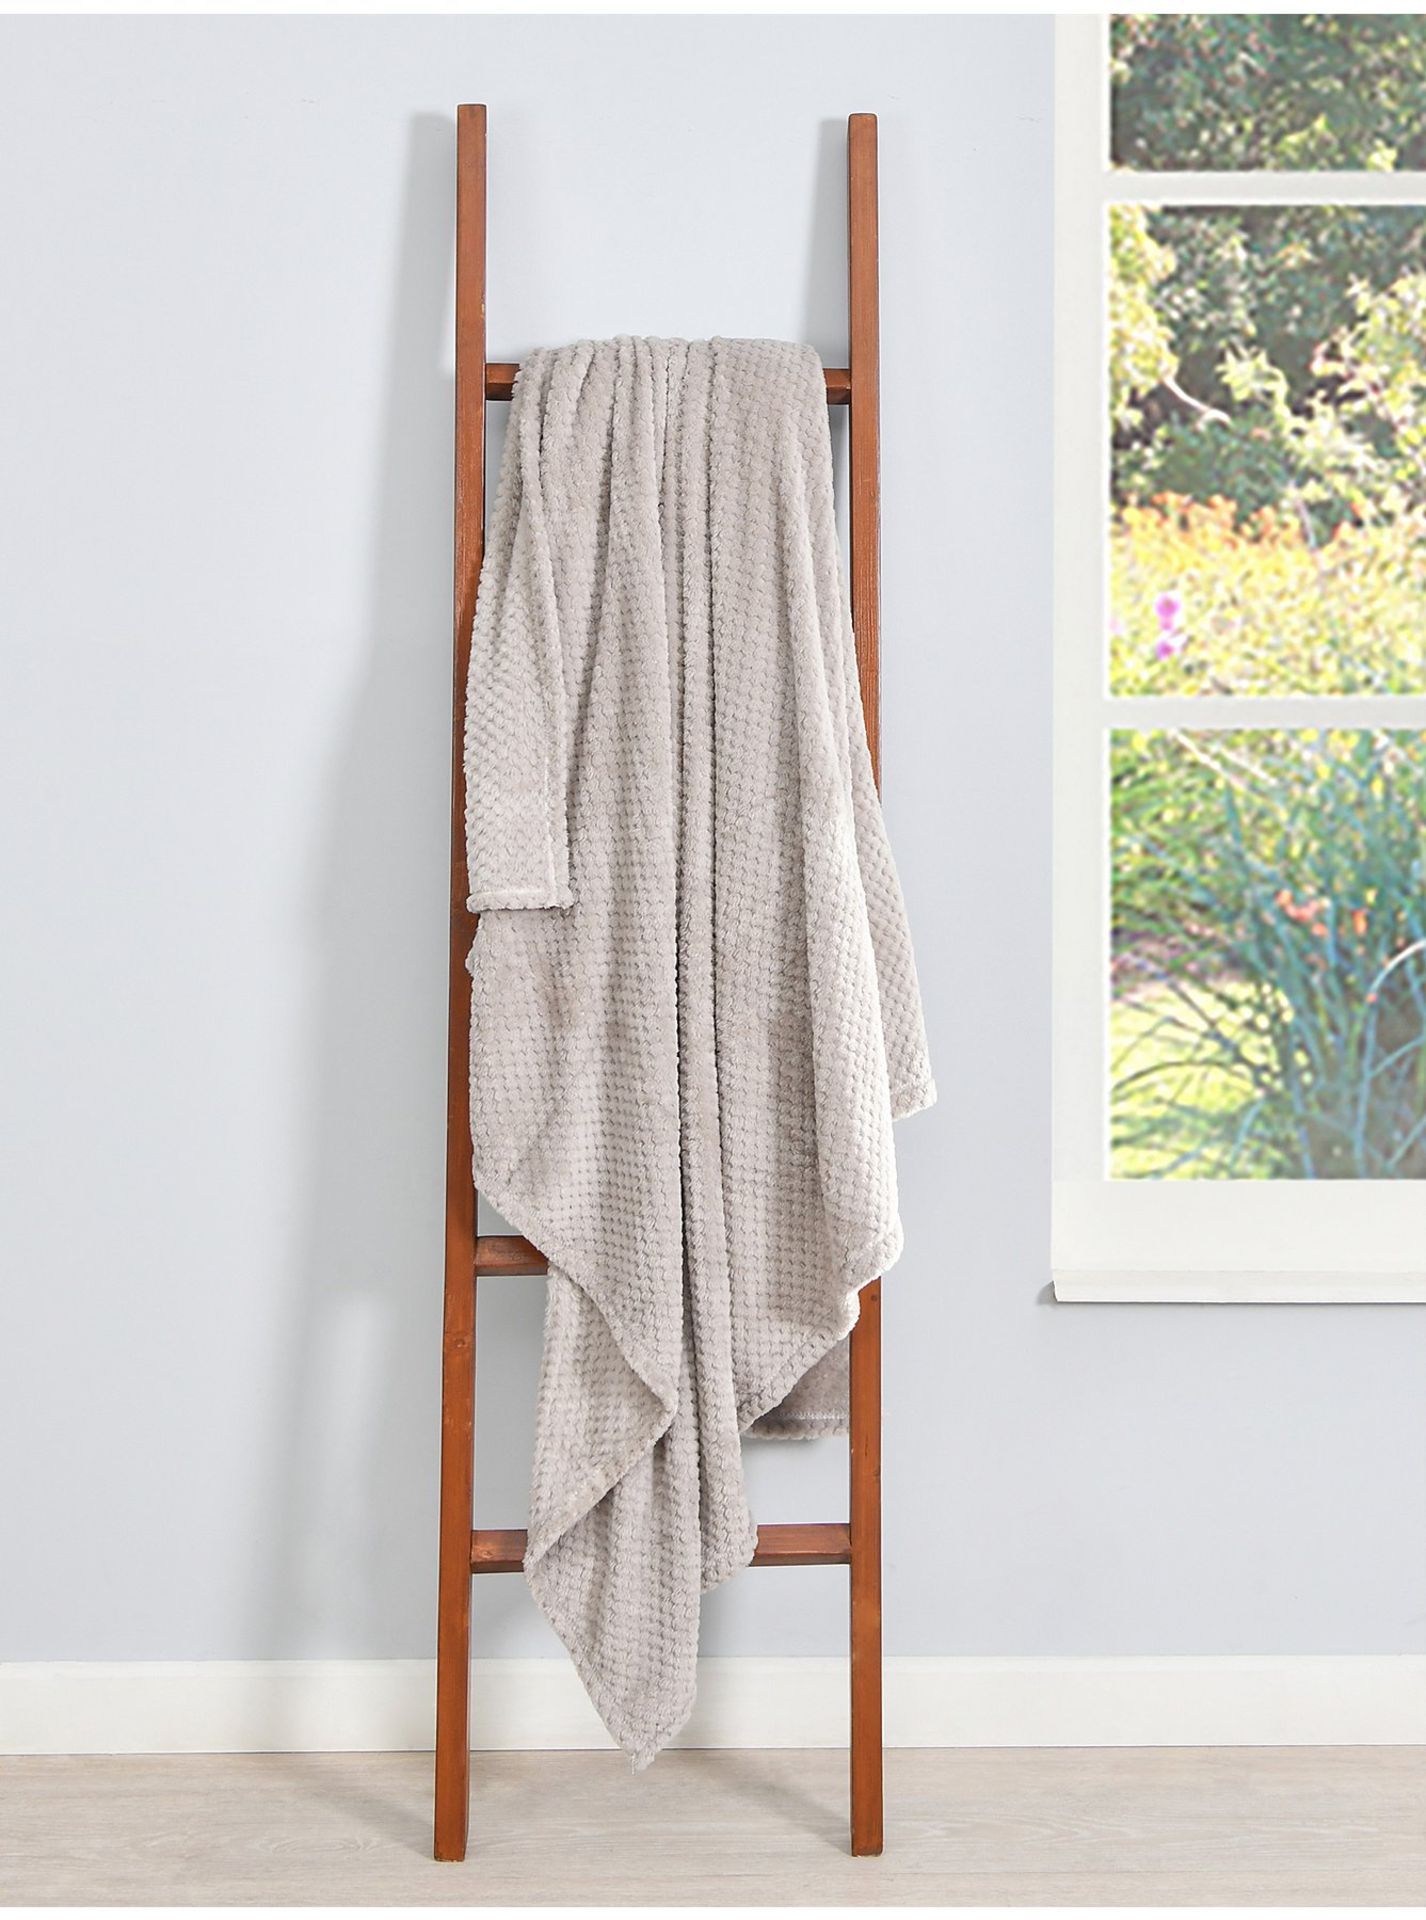 16x NEW & PACKAGED SLEEPDOWN Cosy Collection Soft Touch Waffle Fleece Throw 130 x 160cm - NATURAL. - Image 2 of 4